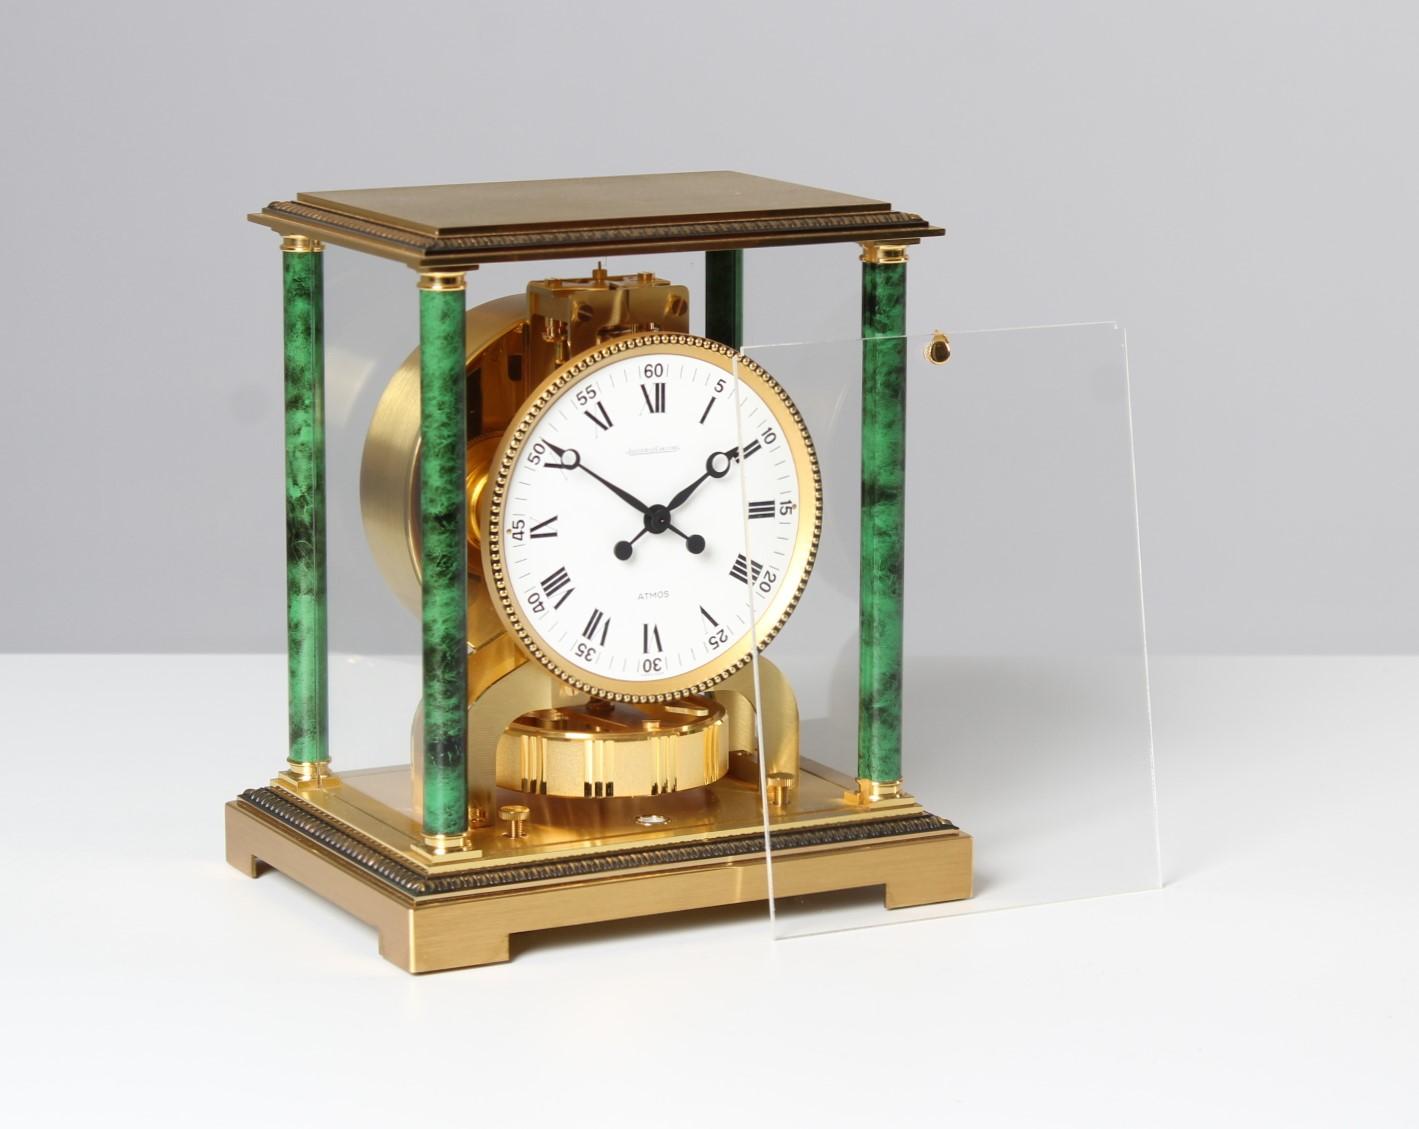 Atmos Vendome with brass base by Jaeger LeCoultre

Switzerland
Brass gold plated and lacquered
Year of manufacture 1972

Dimensions: H x W x D: 24 x 21 x 16 cm

Description:
Atmos Vendome calibre 526 with gilt base and marbled